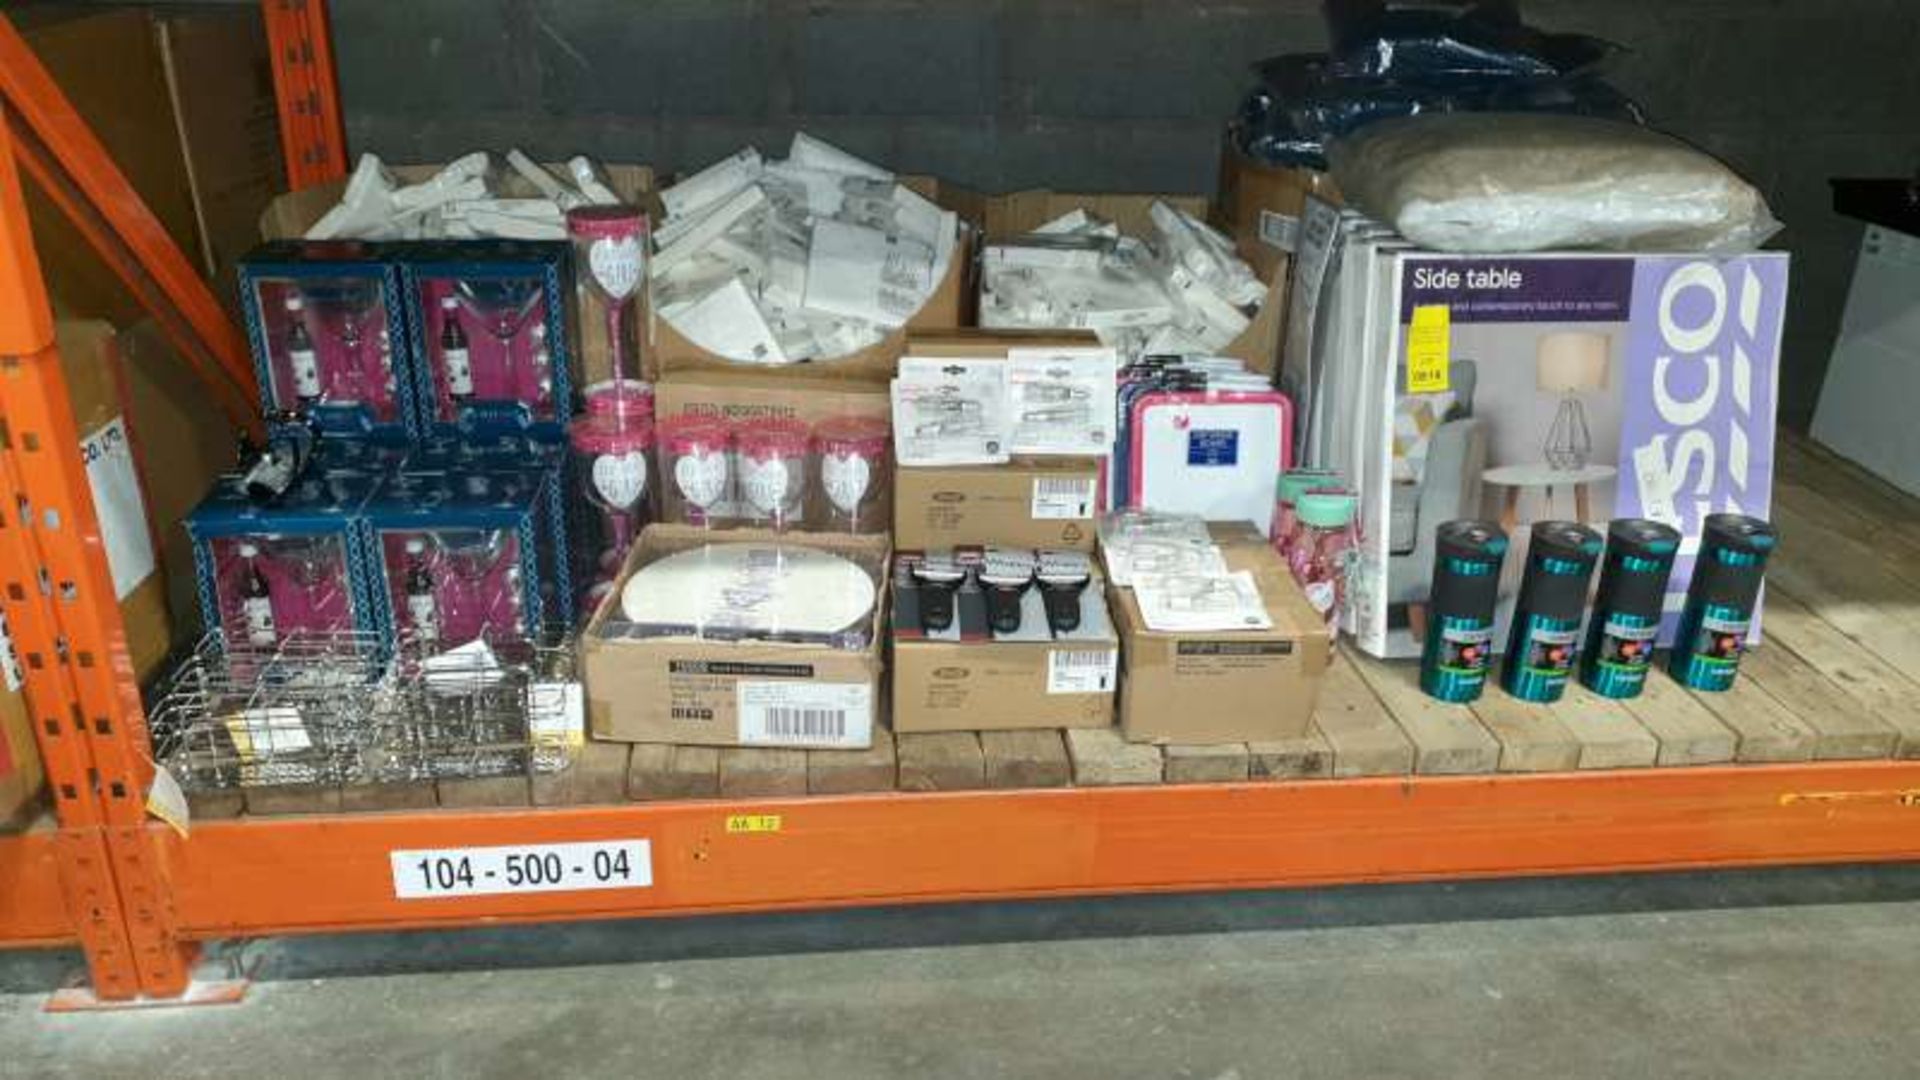 MIXED LOT CONTAINING SIDE TABLES, SOFT WORKS PEELERS, THERMAL CUPS, NAPKINS, PLACEMATS, WINE